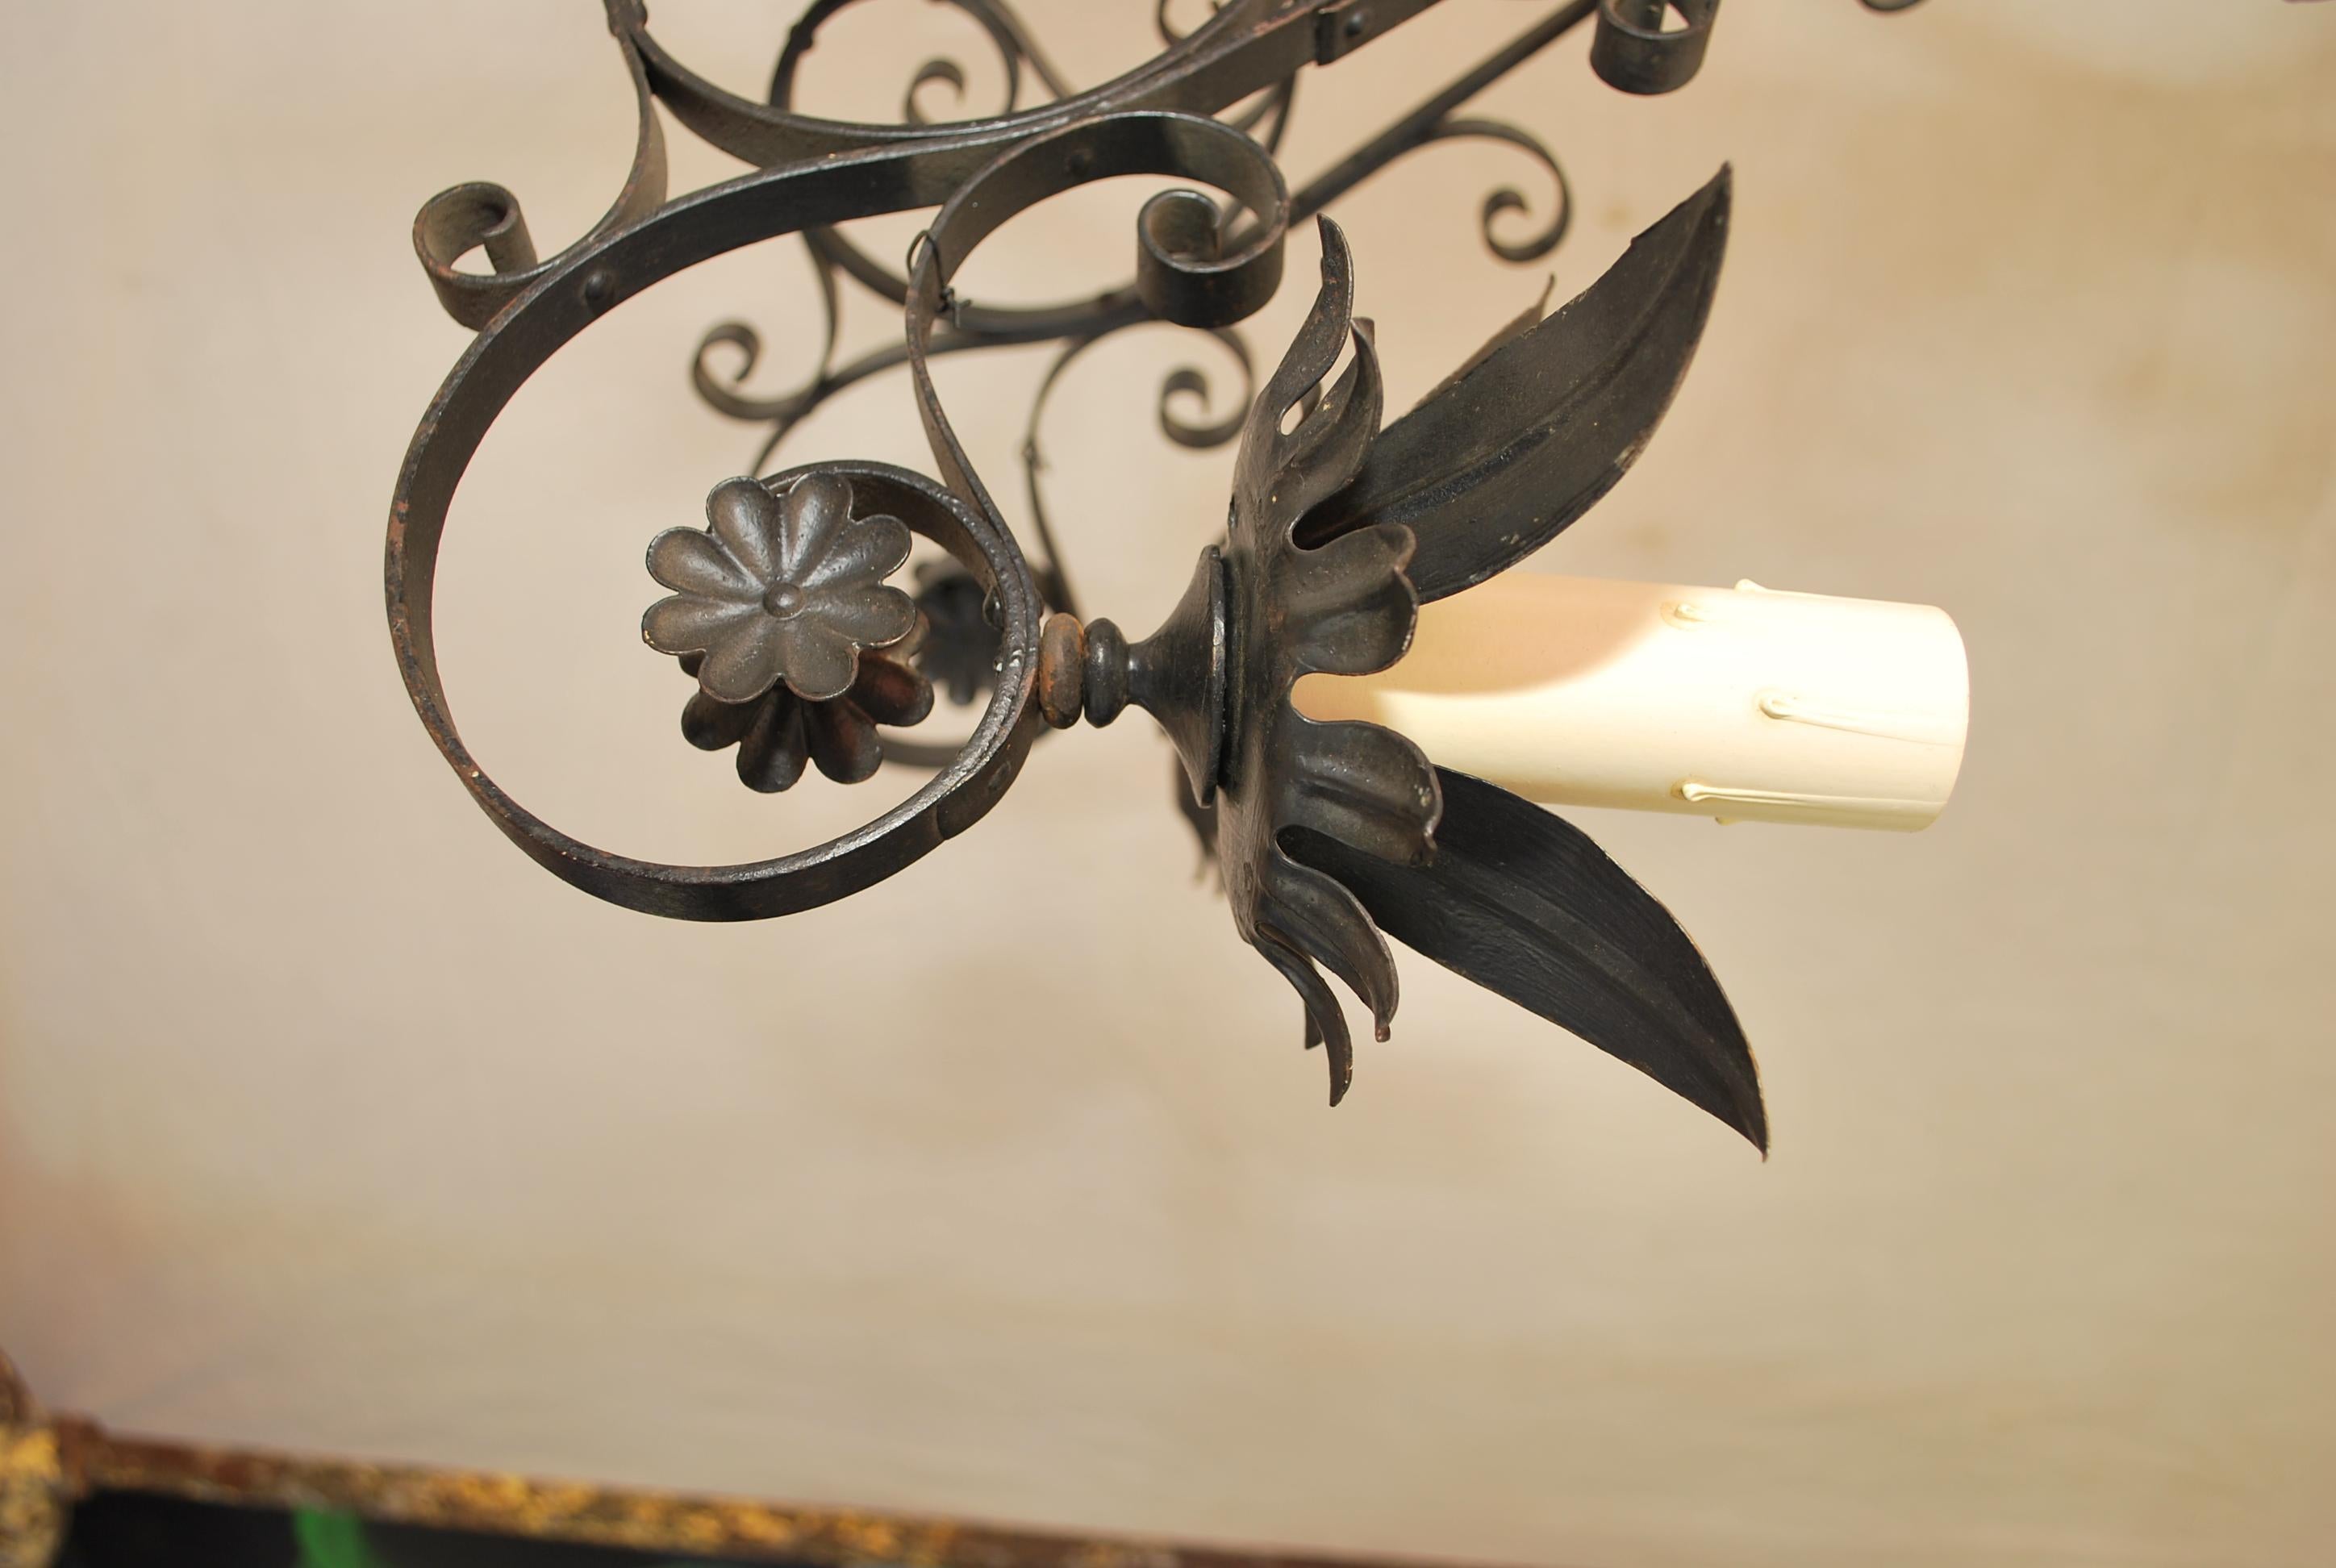 An elegant all hands forged wrought iron chandelier, the patina is much nicer in person